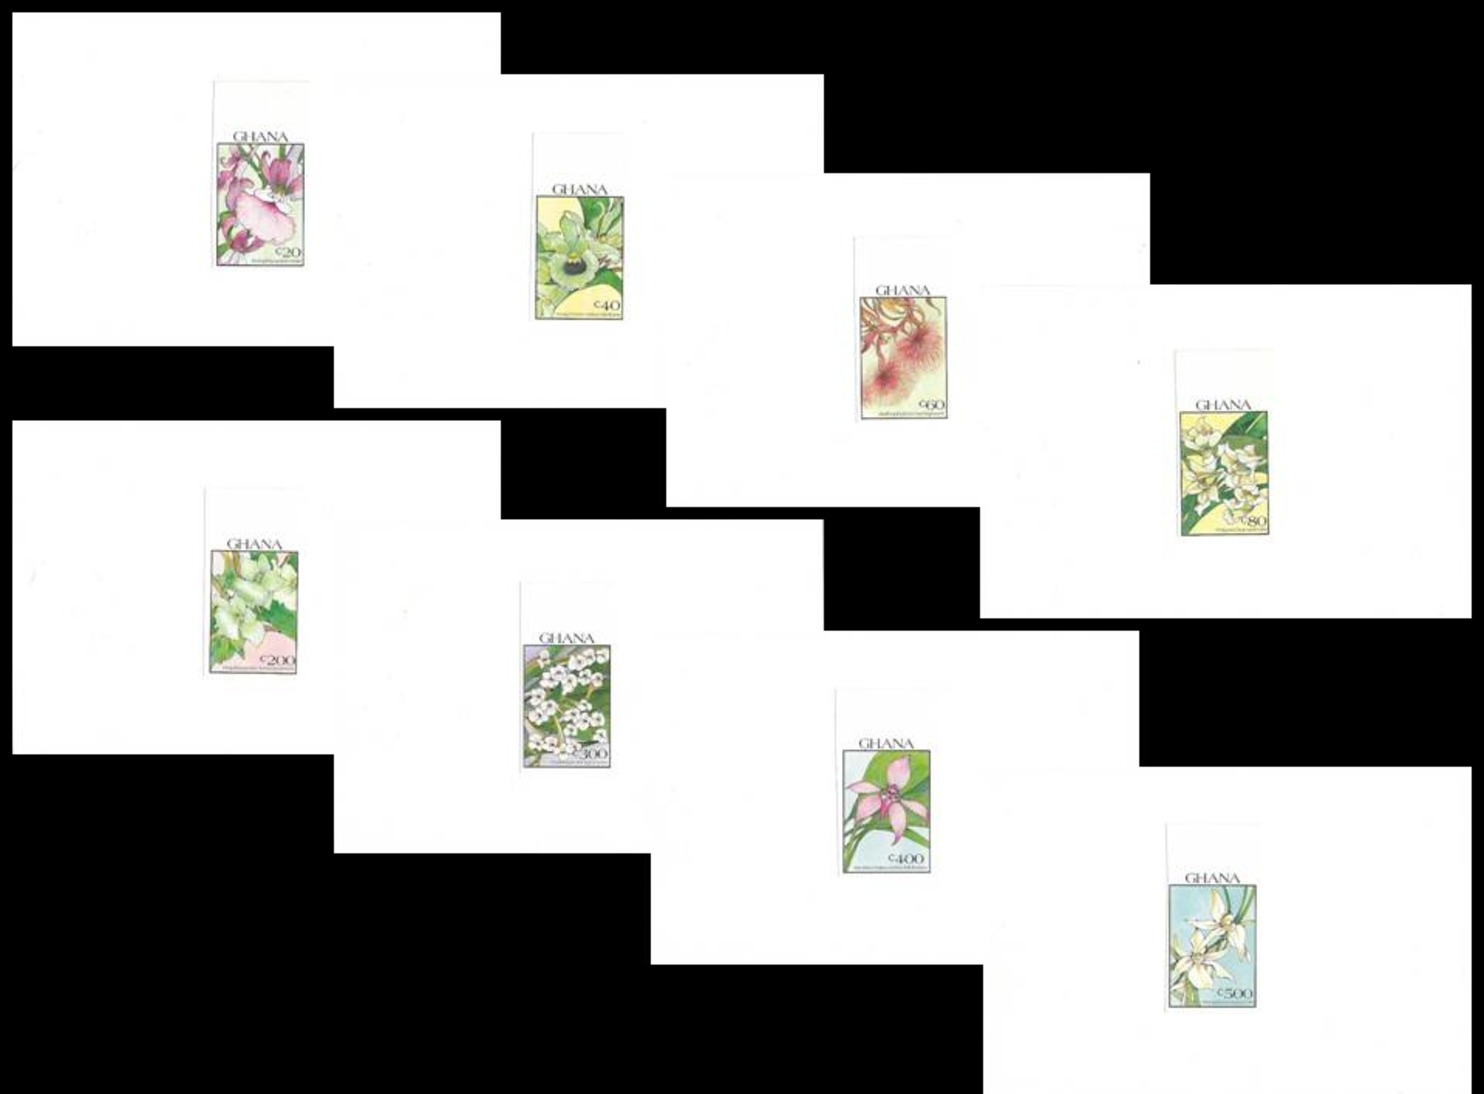 Ref 4 - Ghana 1990 MNH Plants Flowers Orchids Fleurs Orchidées Blumen - Proofs Imperforated Stamps Mounted On Card - Orchids